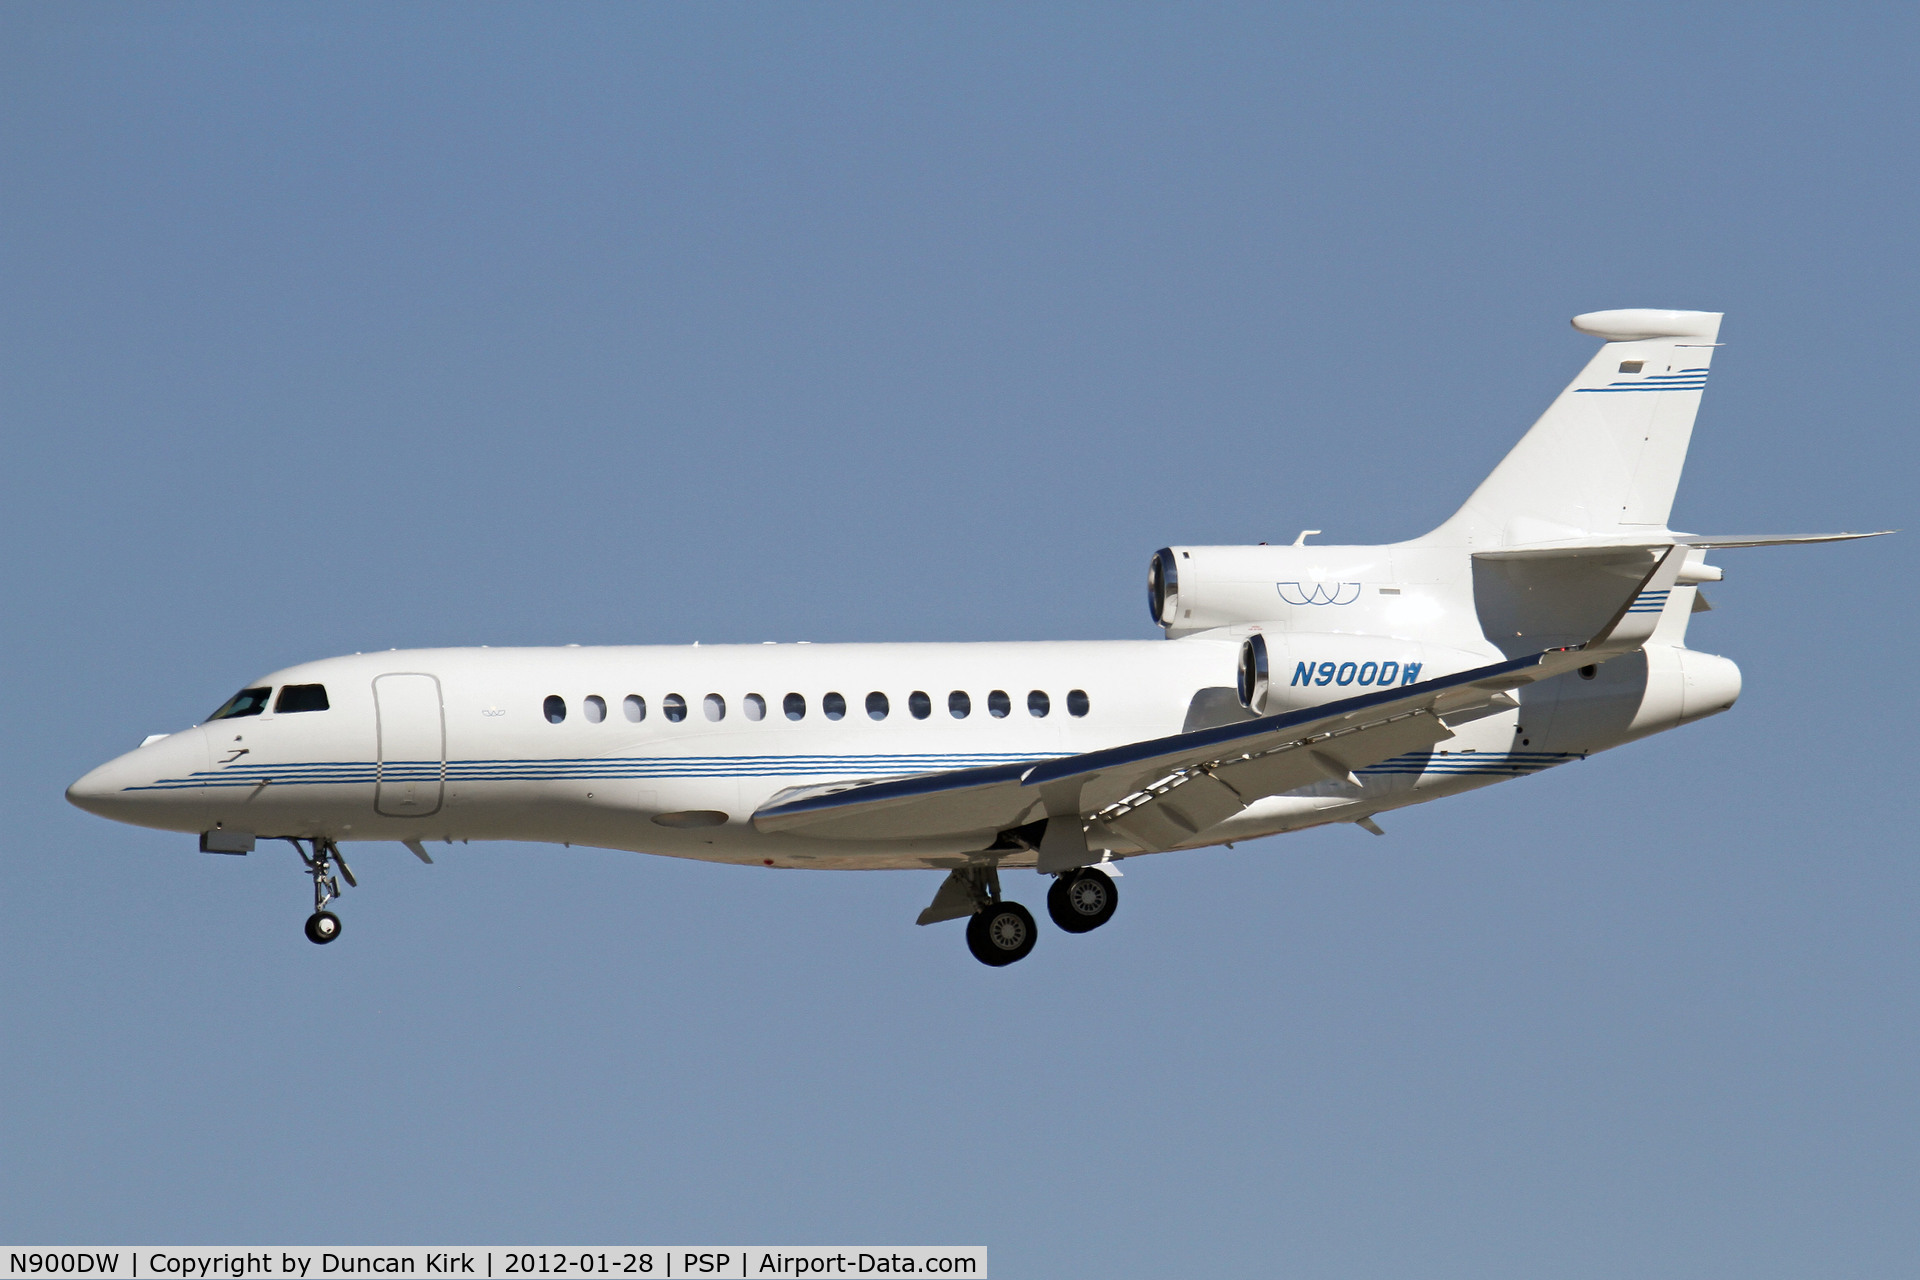 N900DW, 2008 Dassault Falcon 7X C/N 39, The 39th Falcon 7X on short finals to Palm Springs